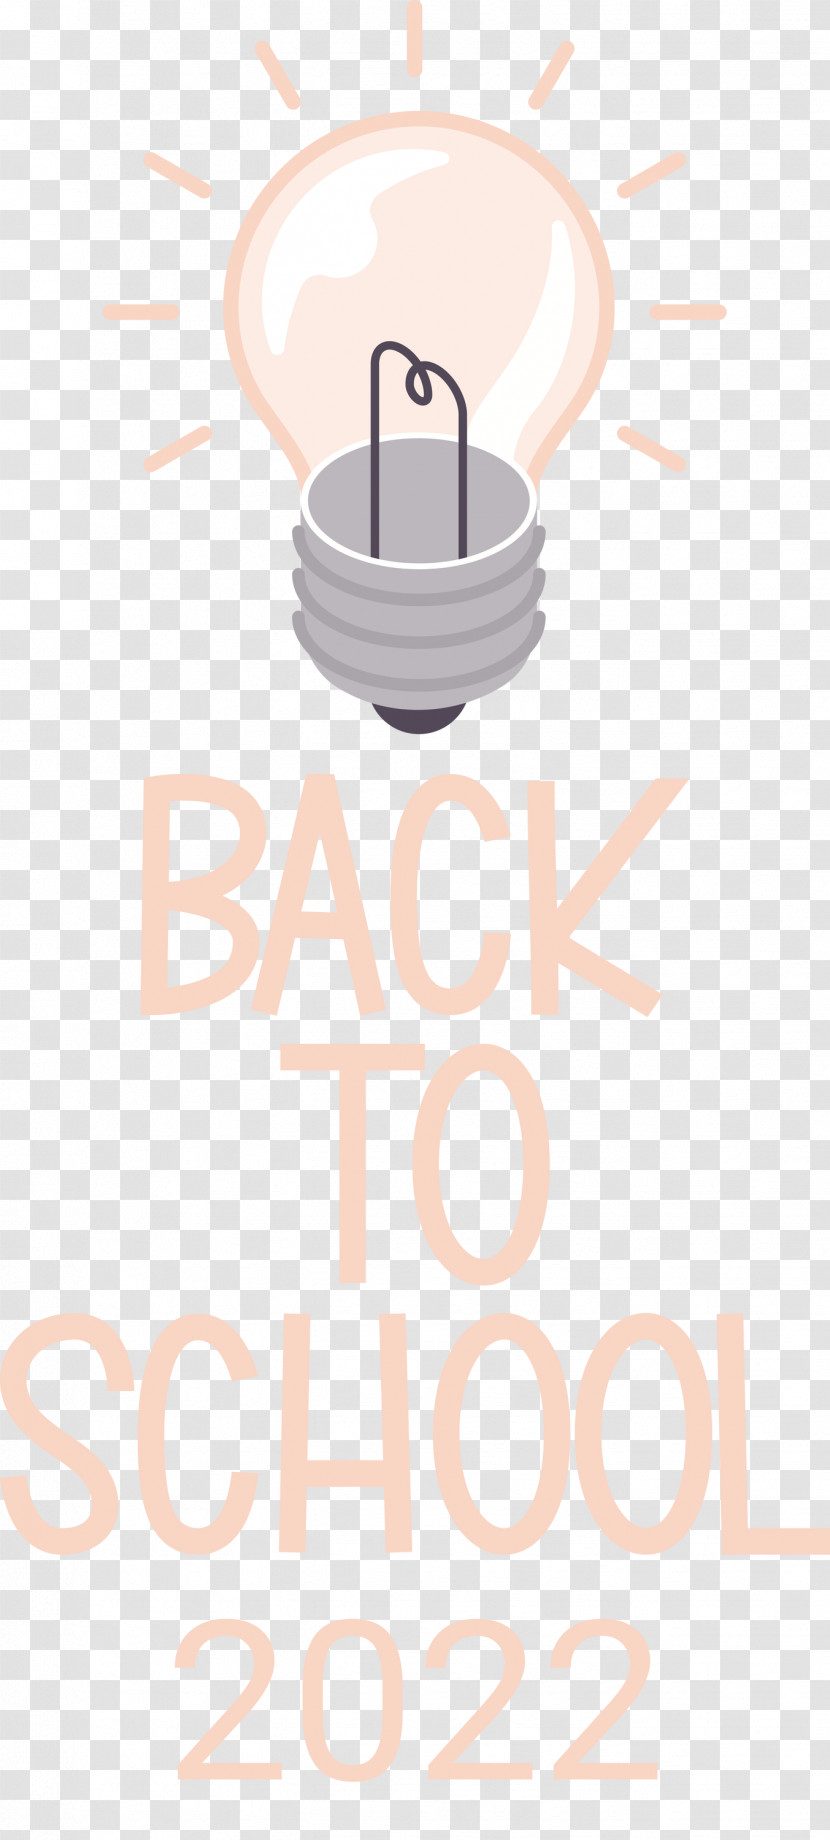 Back To School Back To School 2022 Transparent PNG